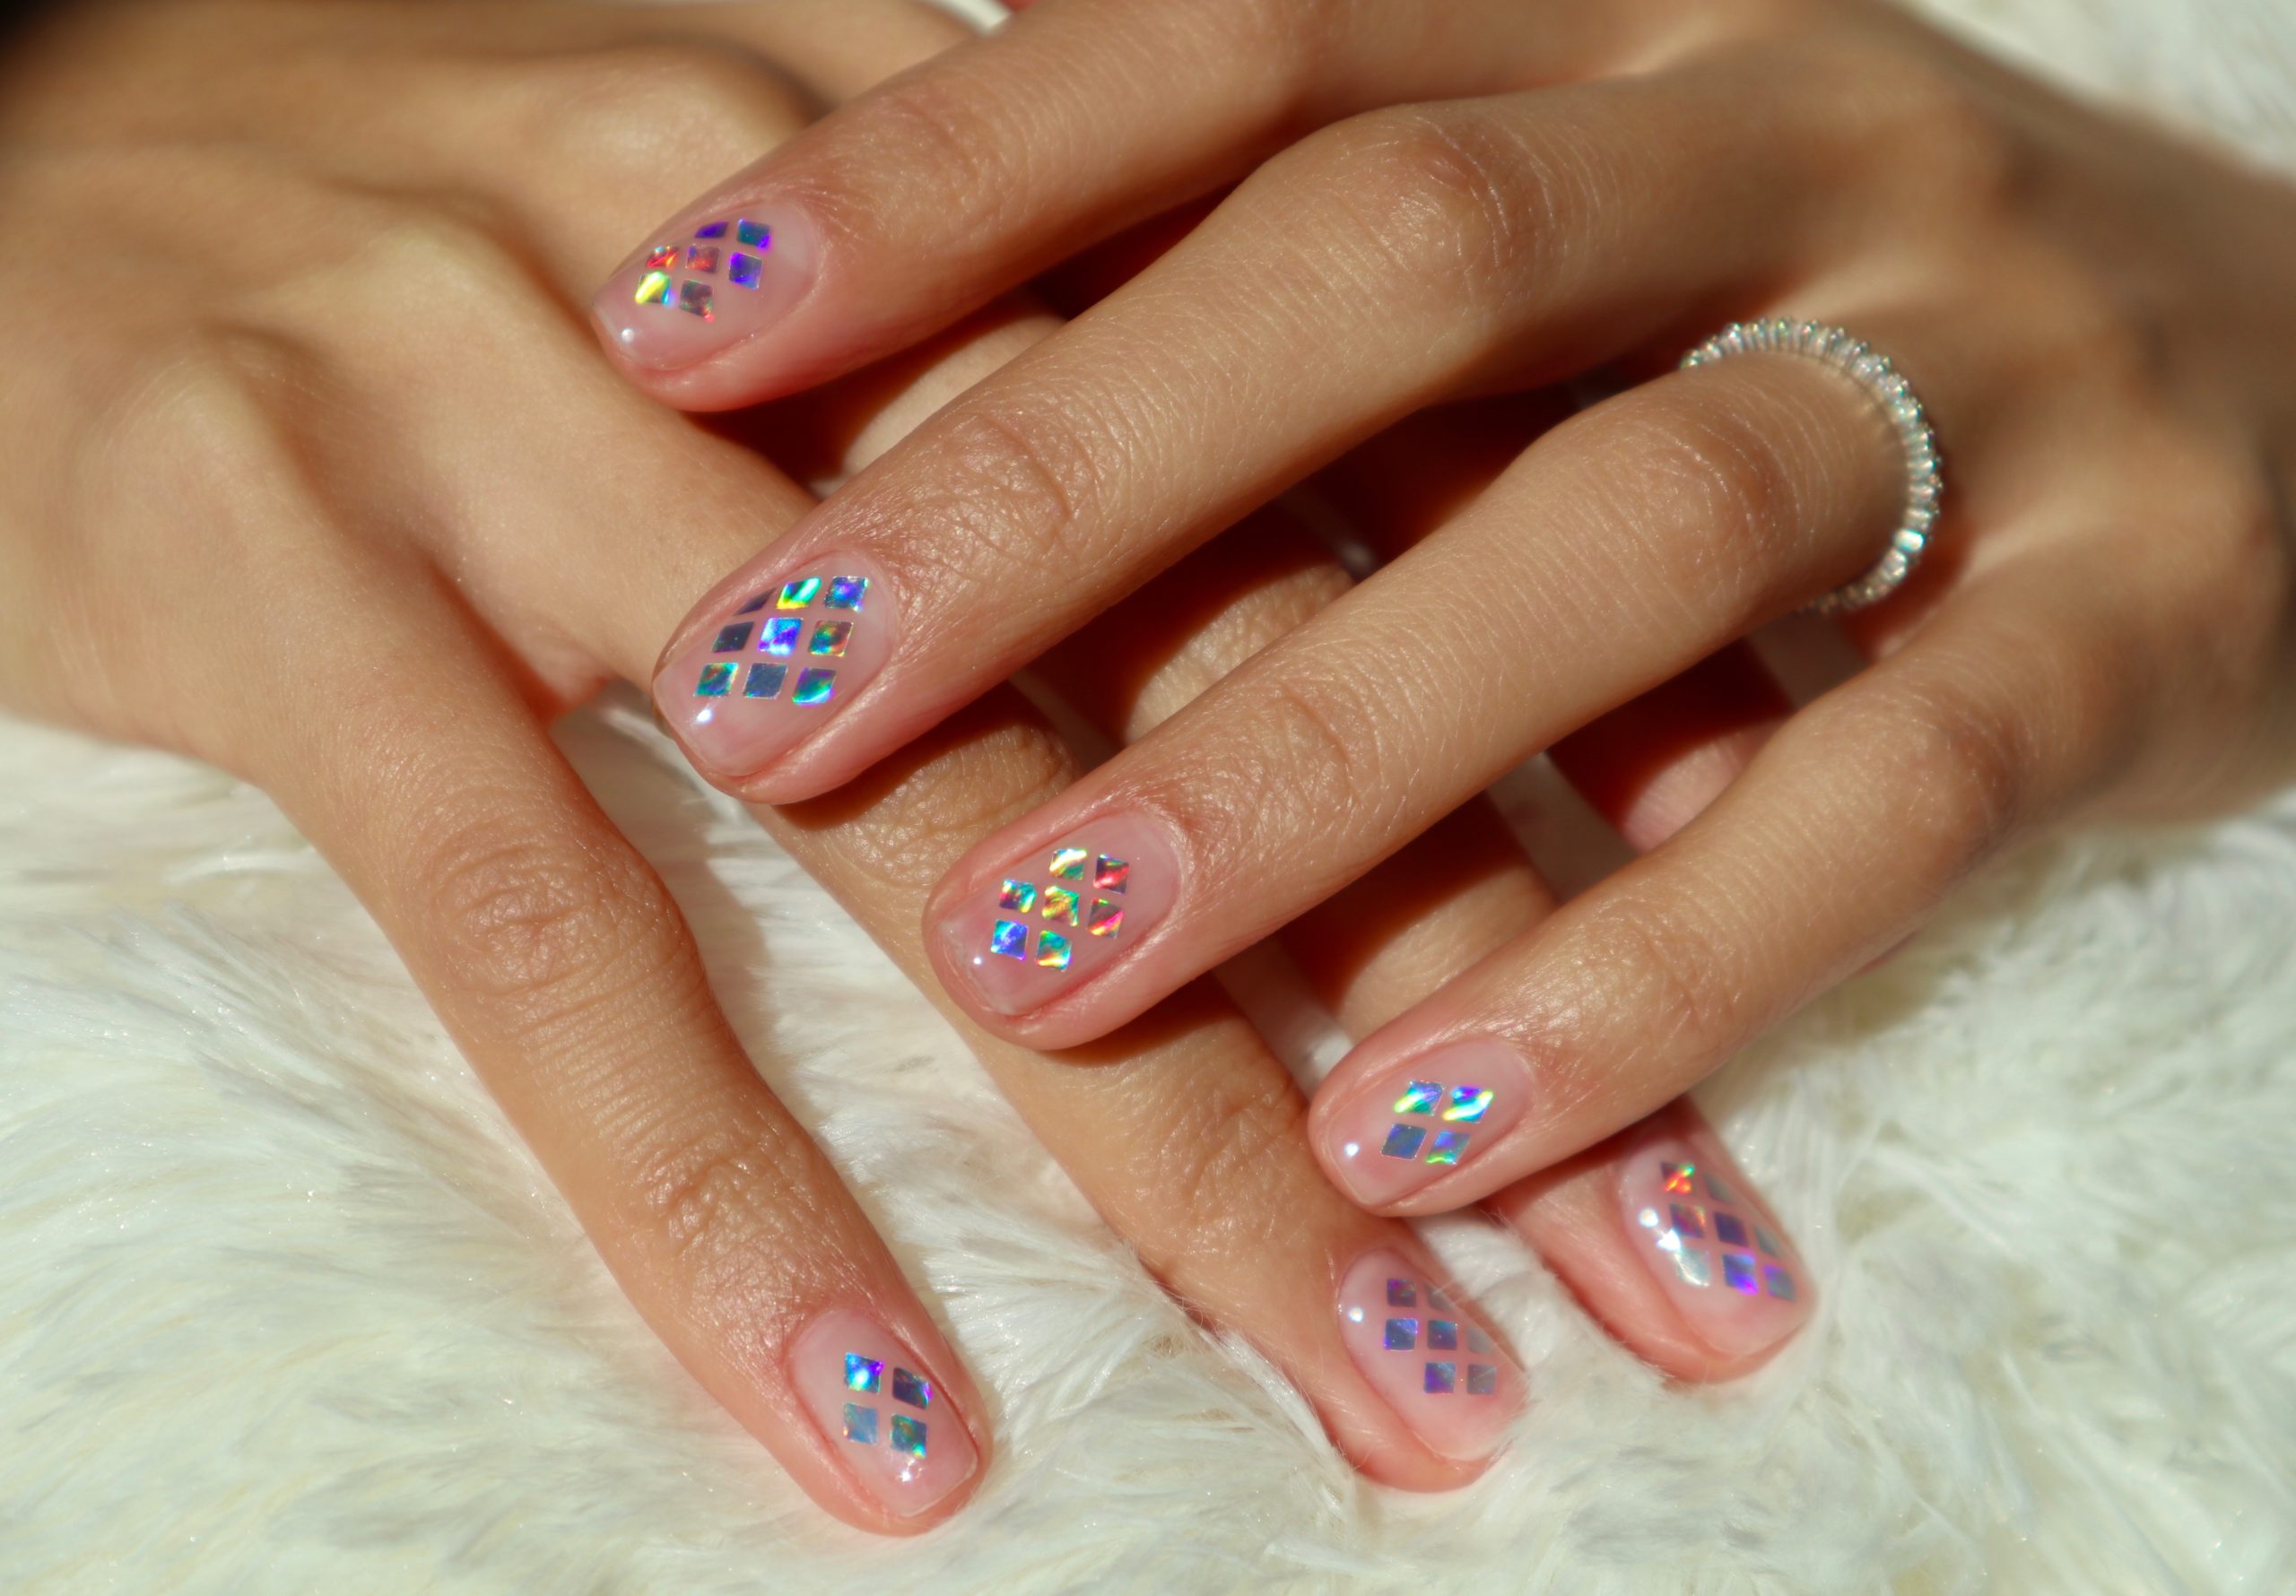 The EASIEST way to sugar nails that LAST! 